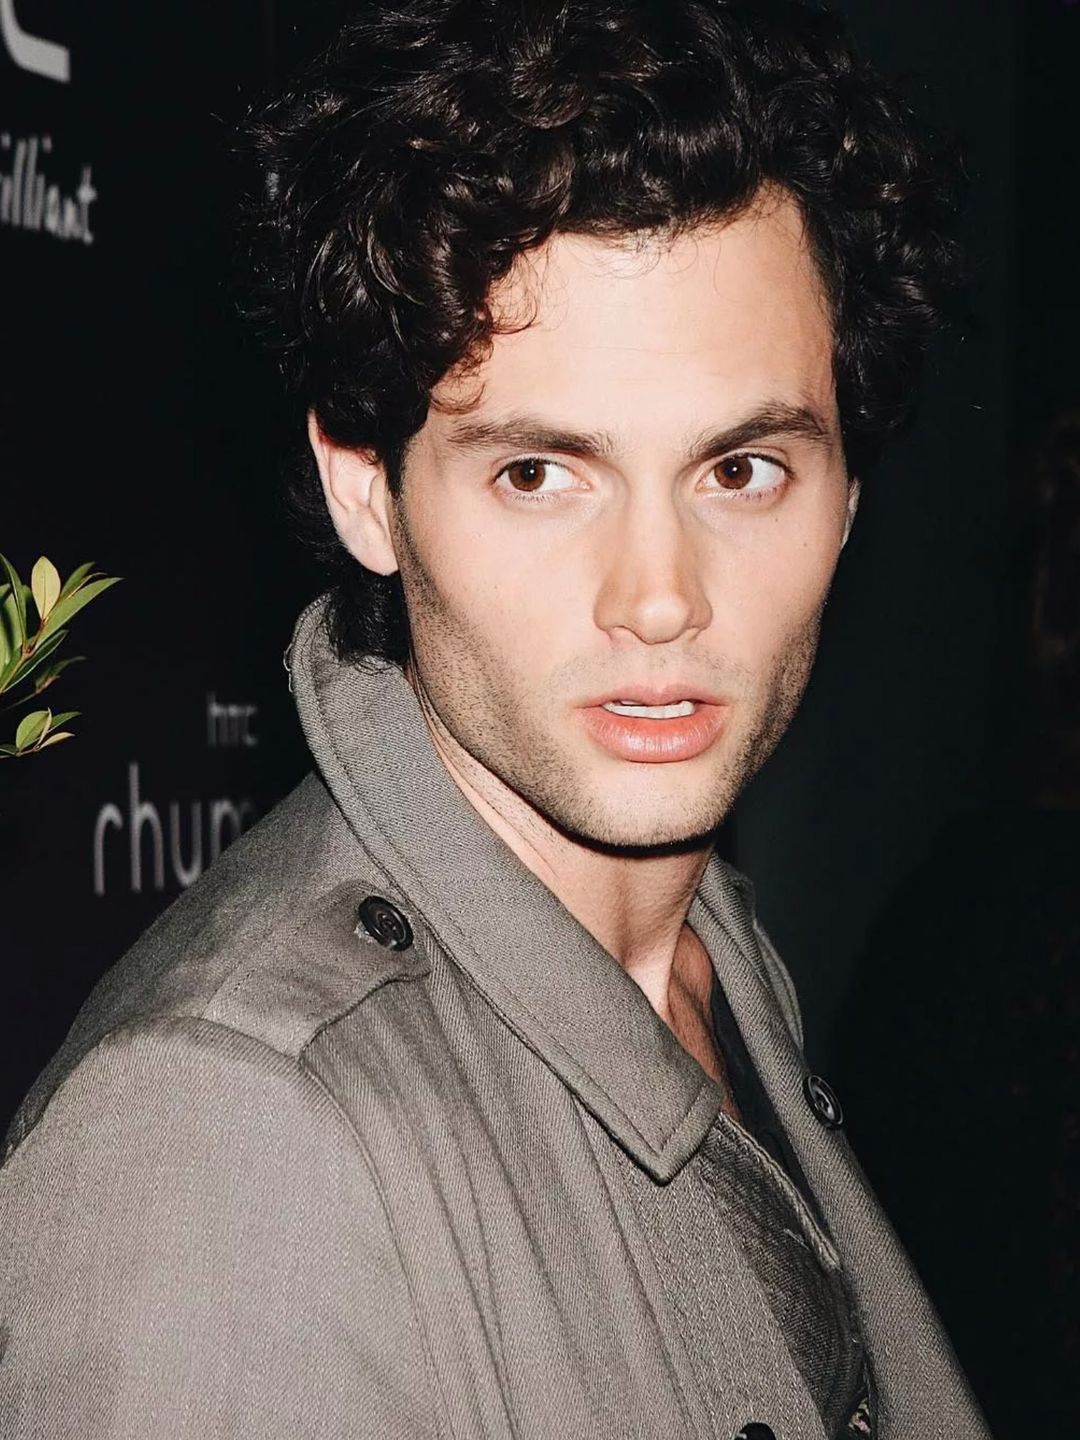 Penn Badgley who is his father